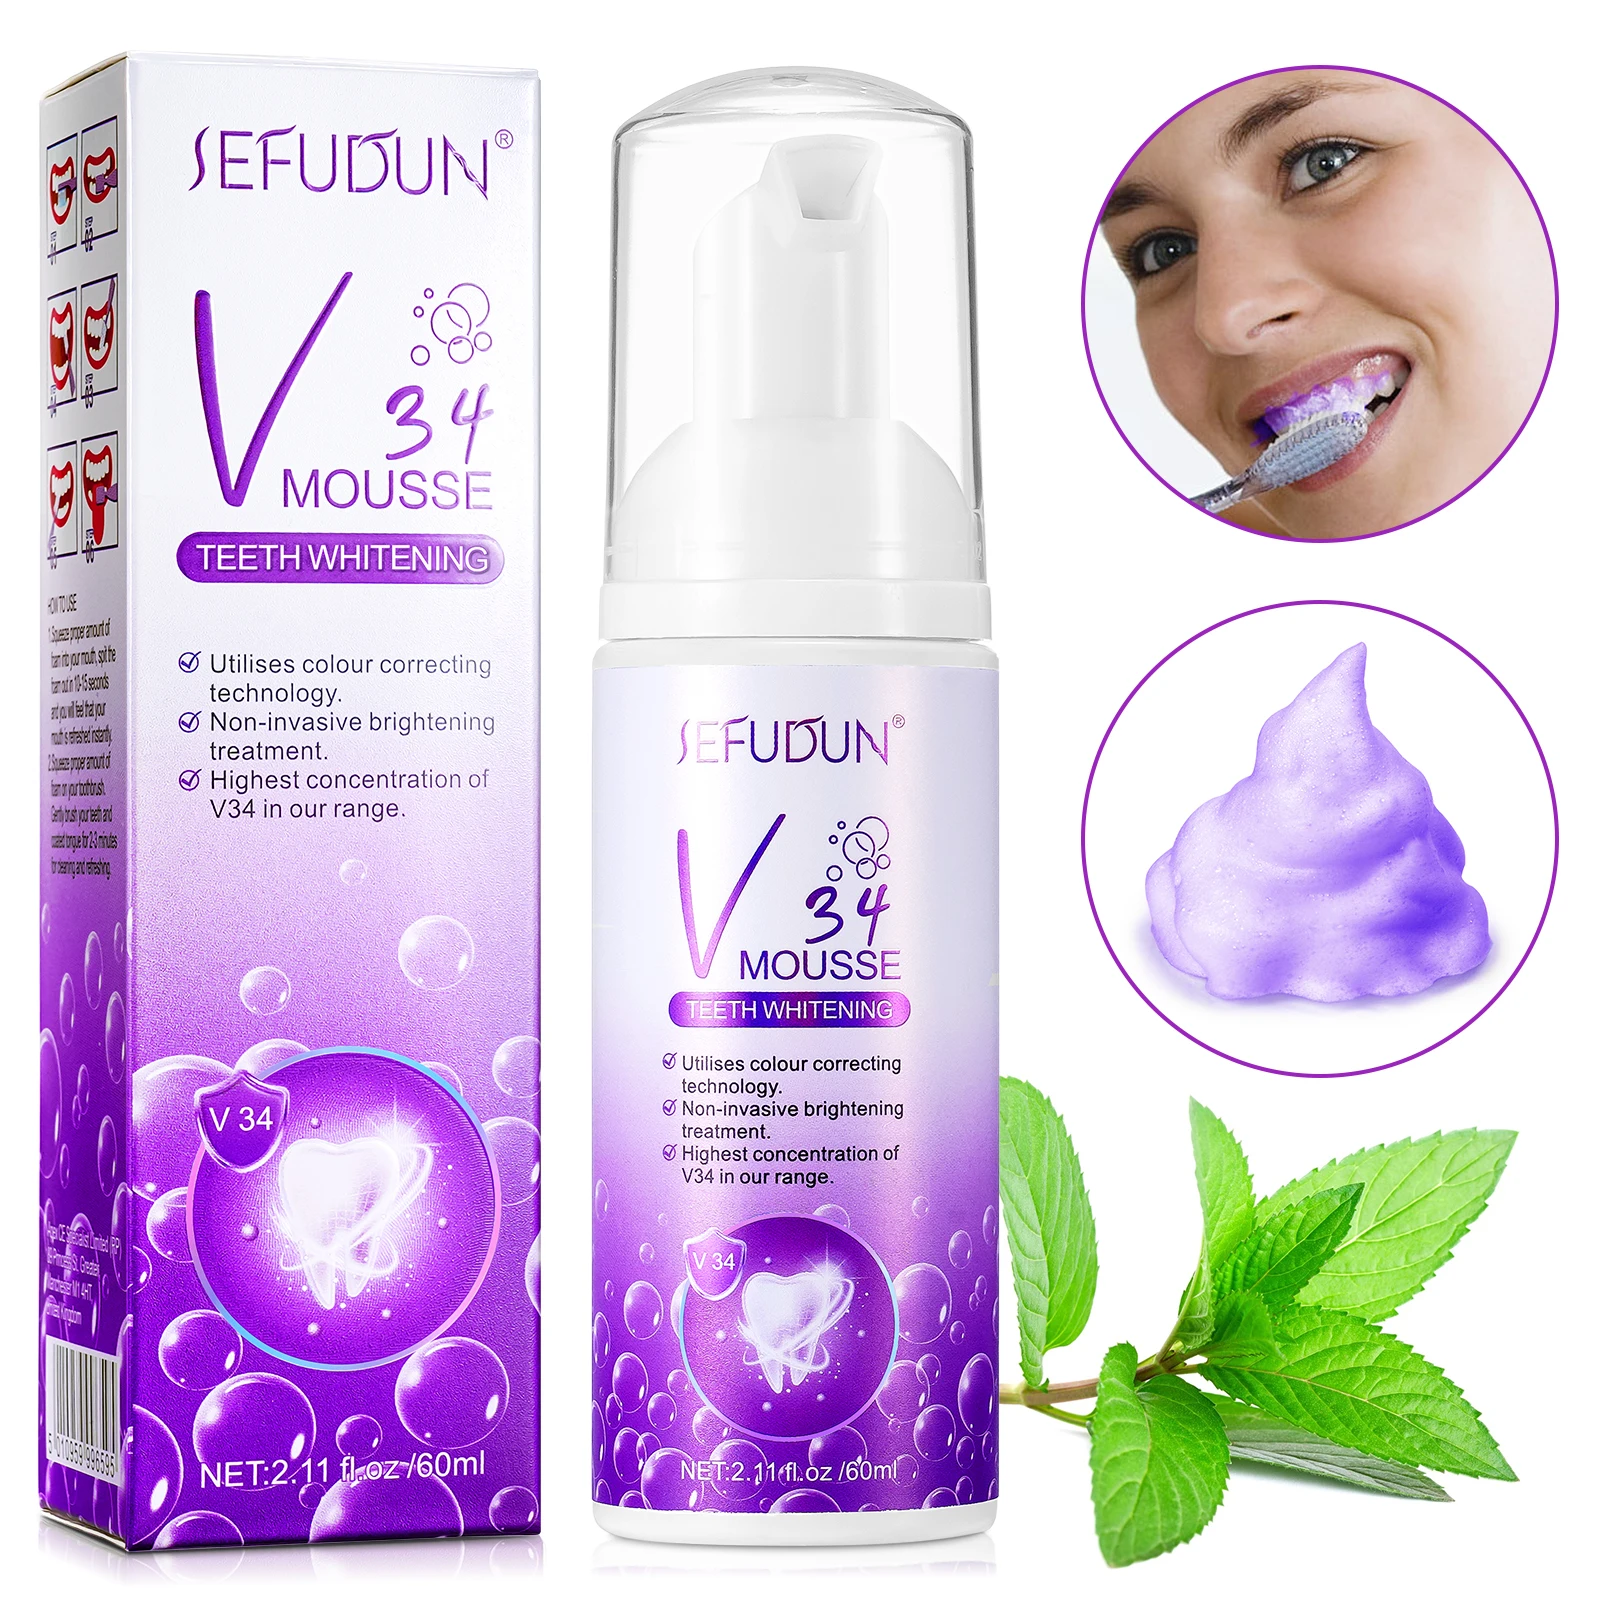 

Yellow Stain Removal Teeth whitening Foam Mousse V 34 Purple Teeth Cleansing Foam Toothpaste for Sensitive Teeth